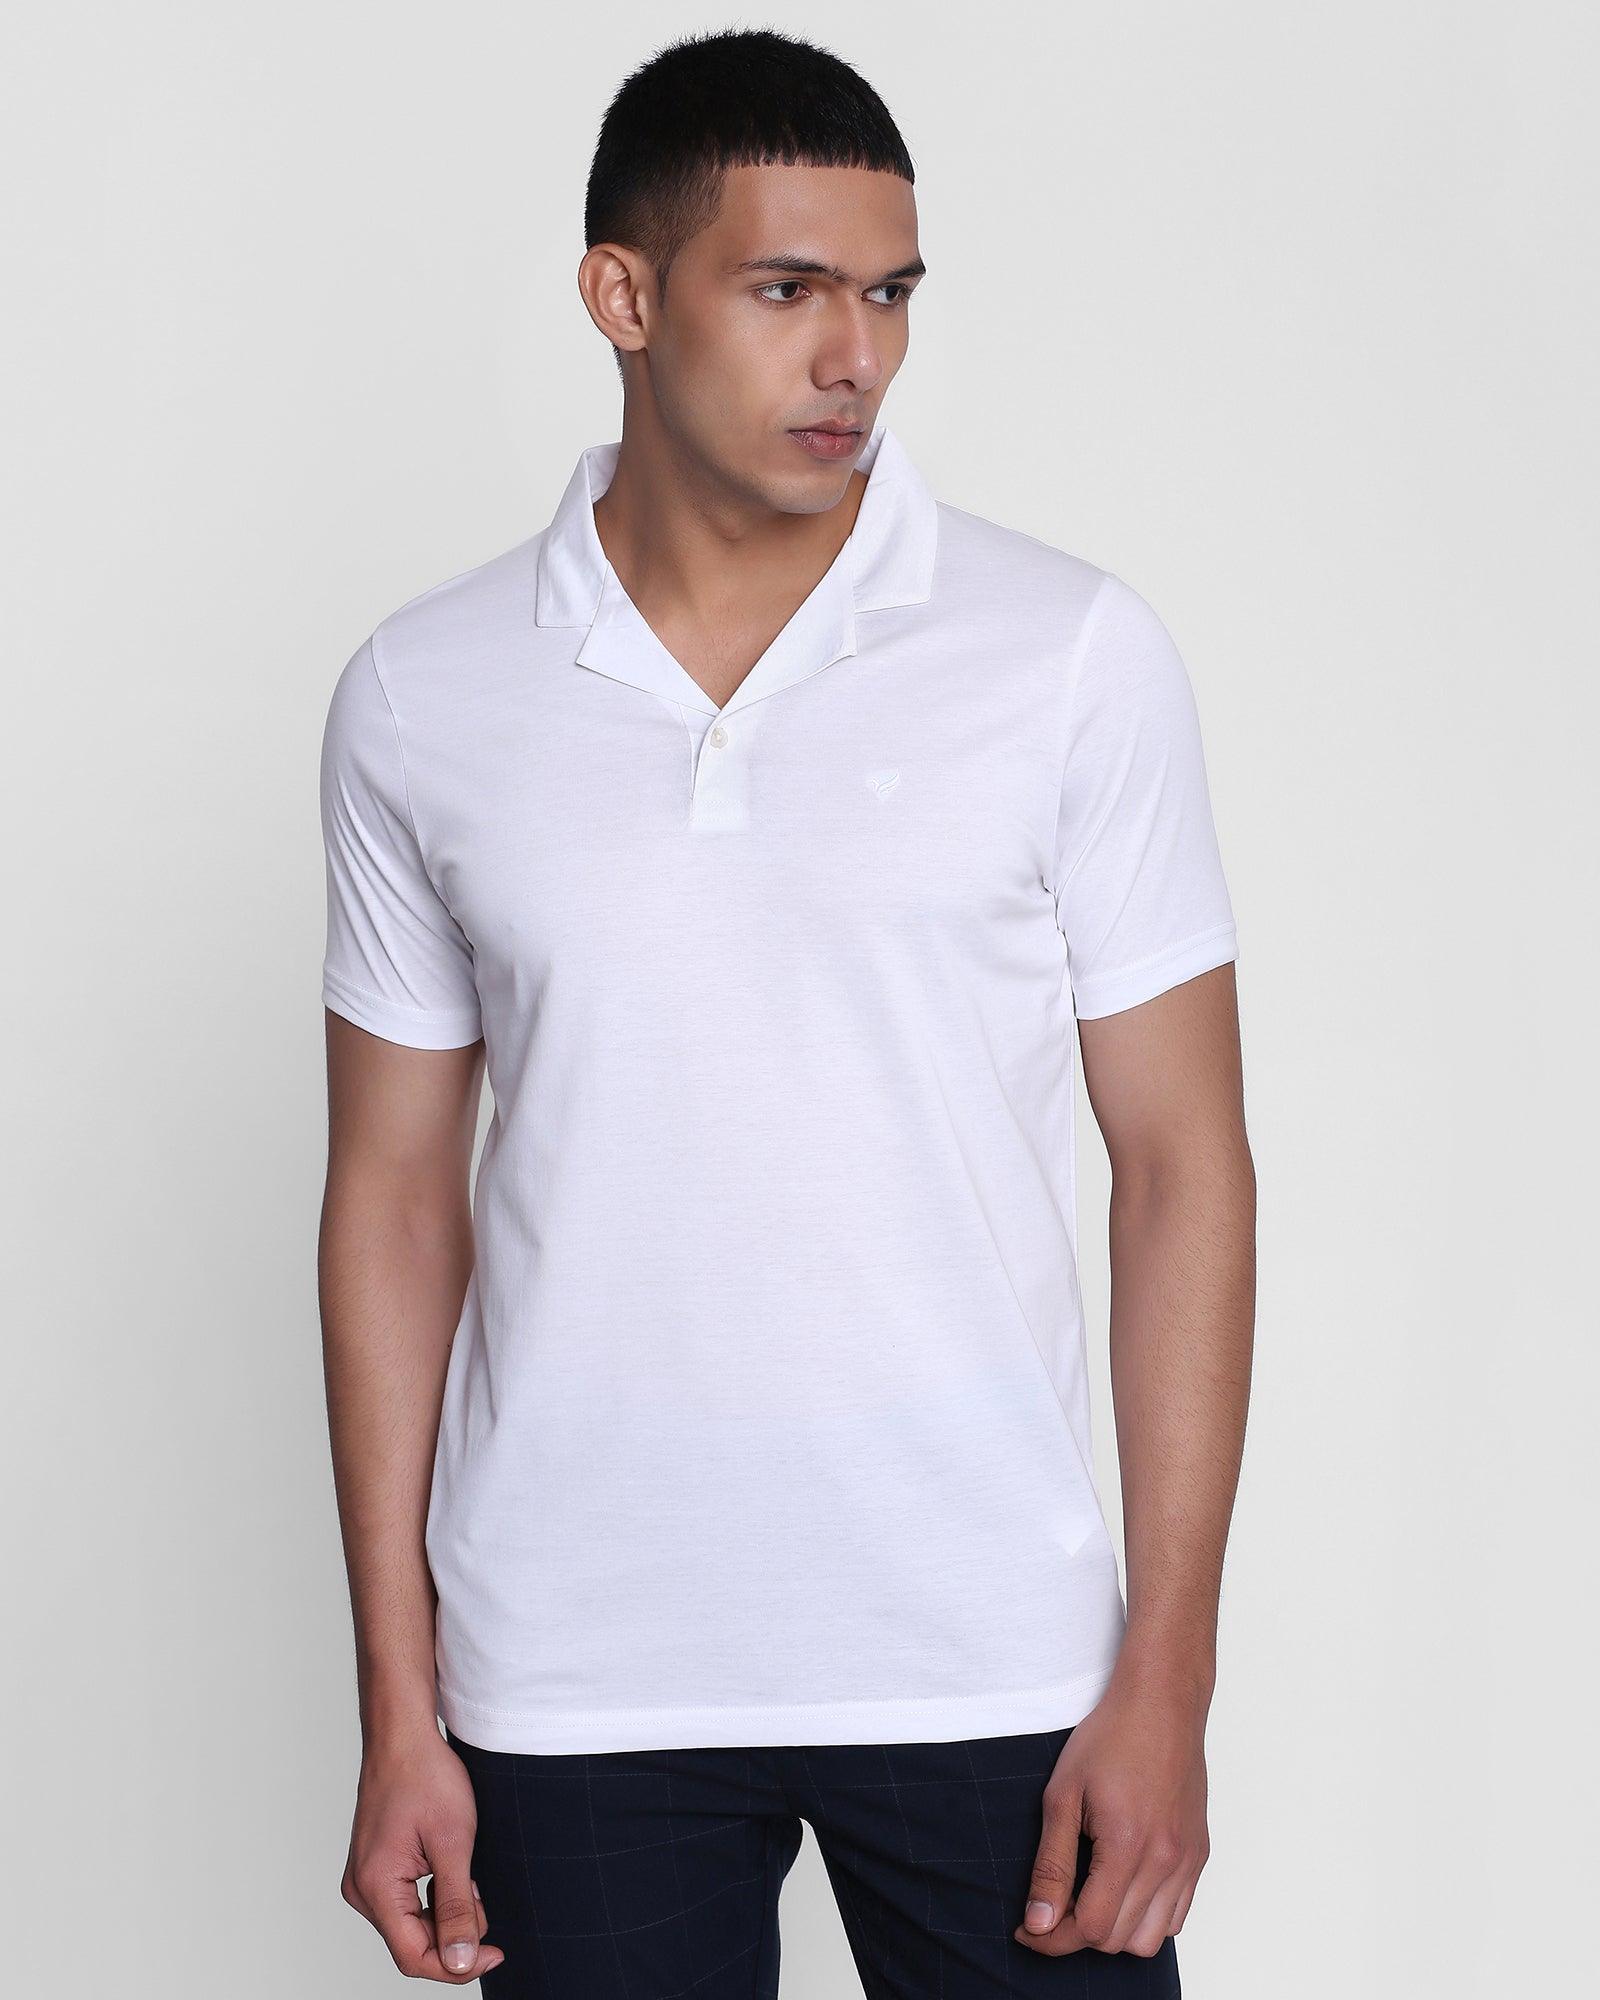 Stylized Collar White Solid T Shirt - Finch